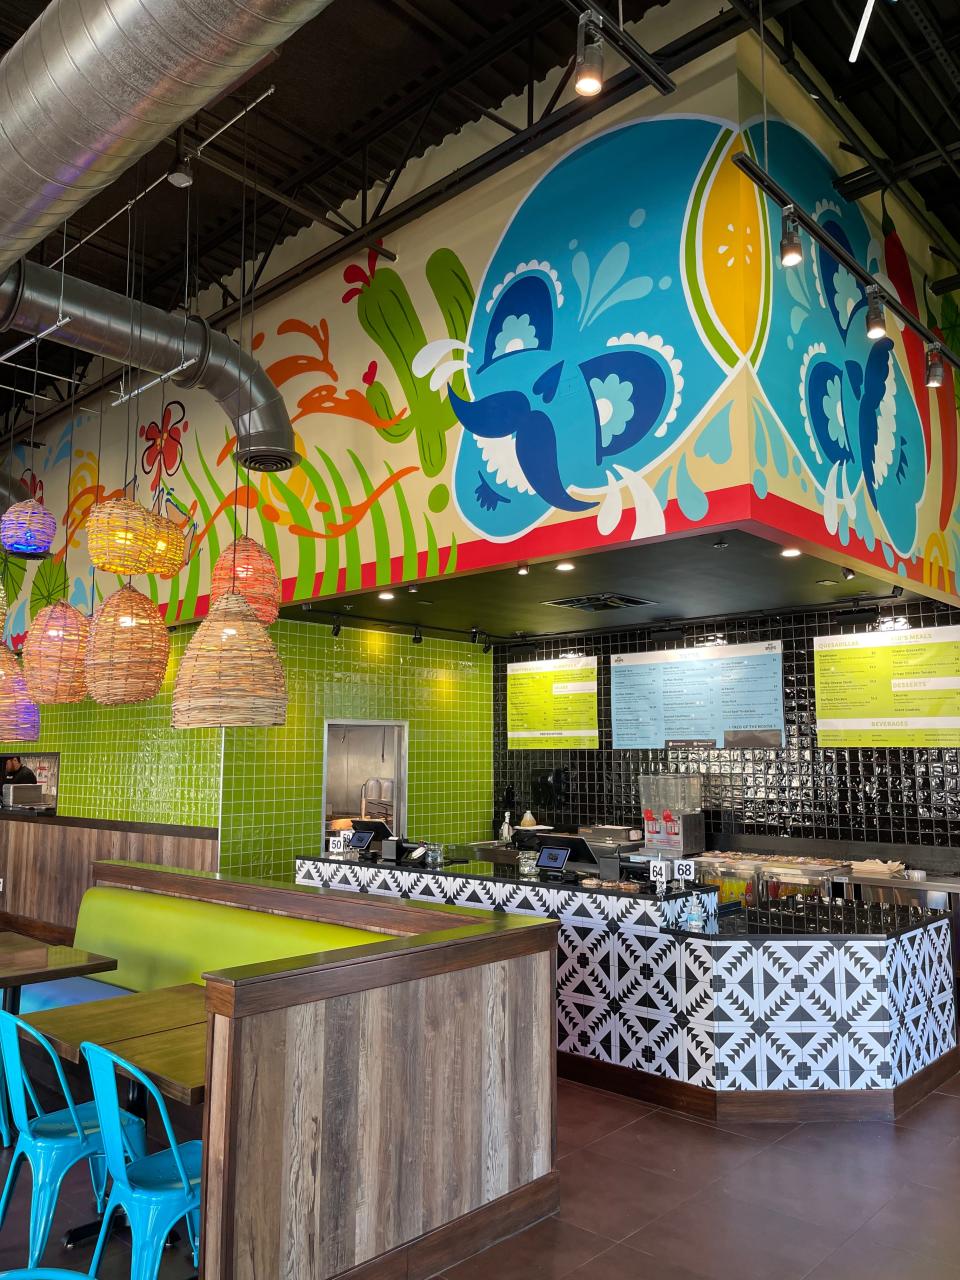 As if delicious tacos, quesadillas and bowls weren't enough, Dos Amigos Tacos' interior is a feast for the eyes.